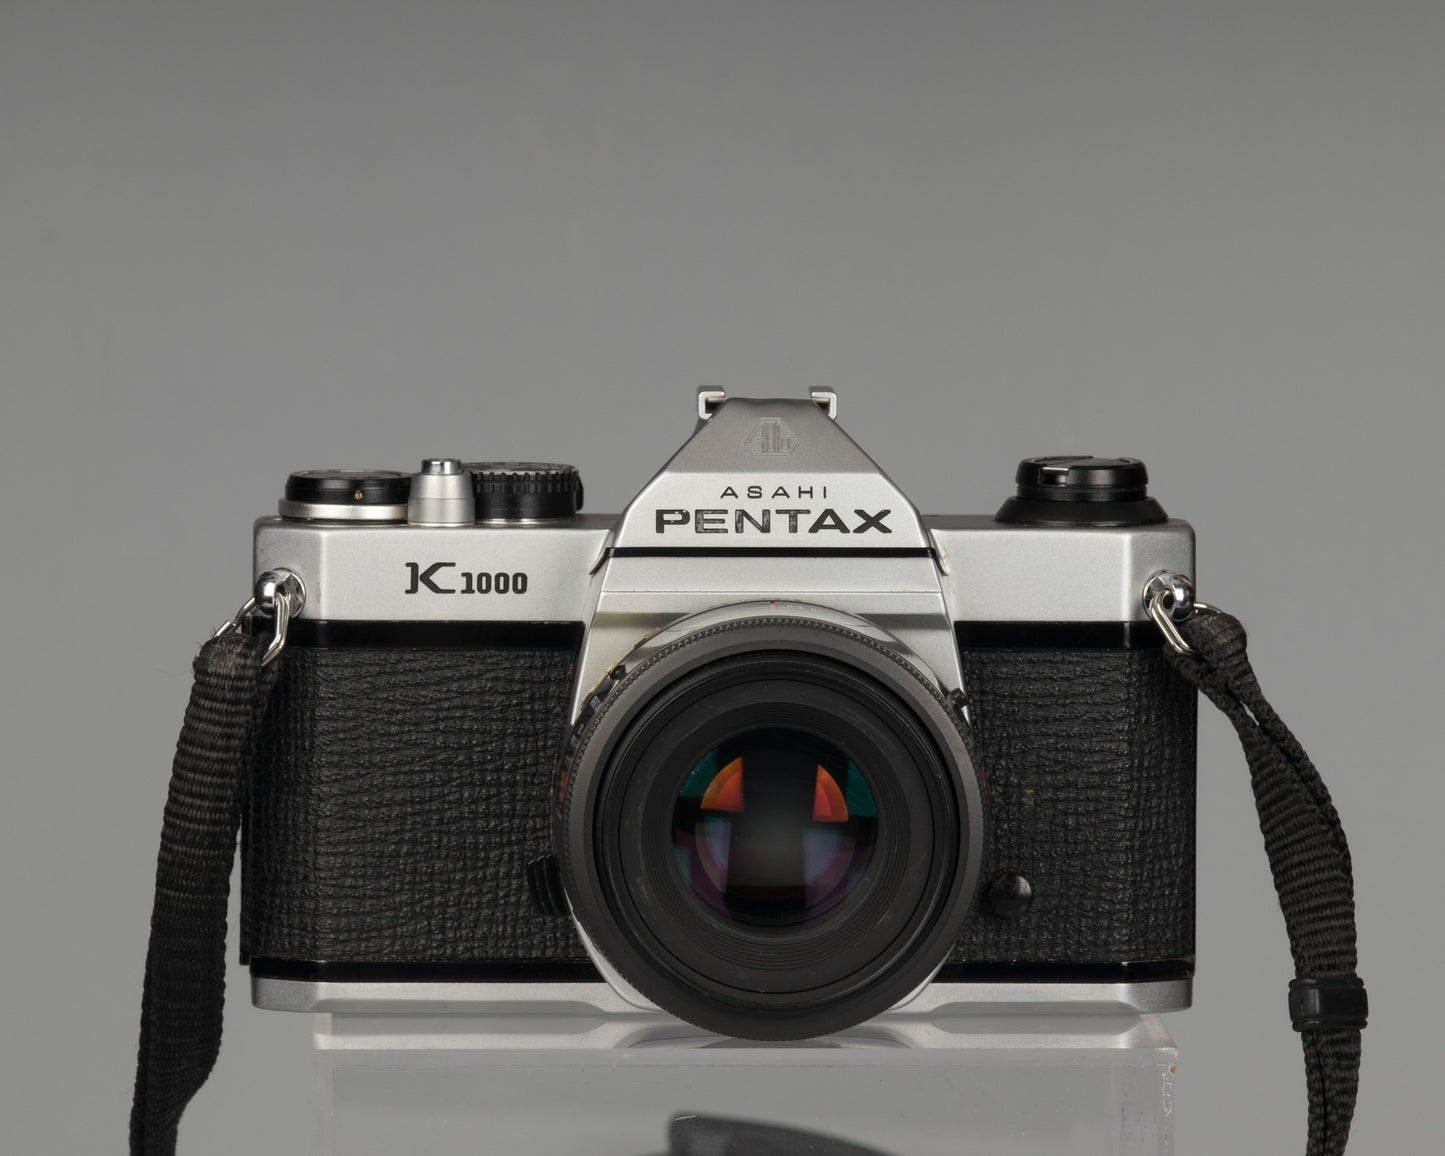 Pentax K1000 front view